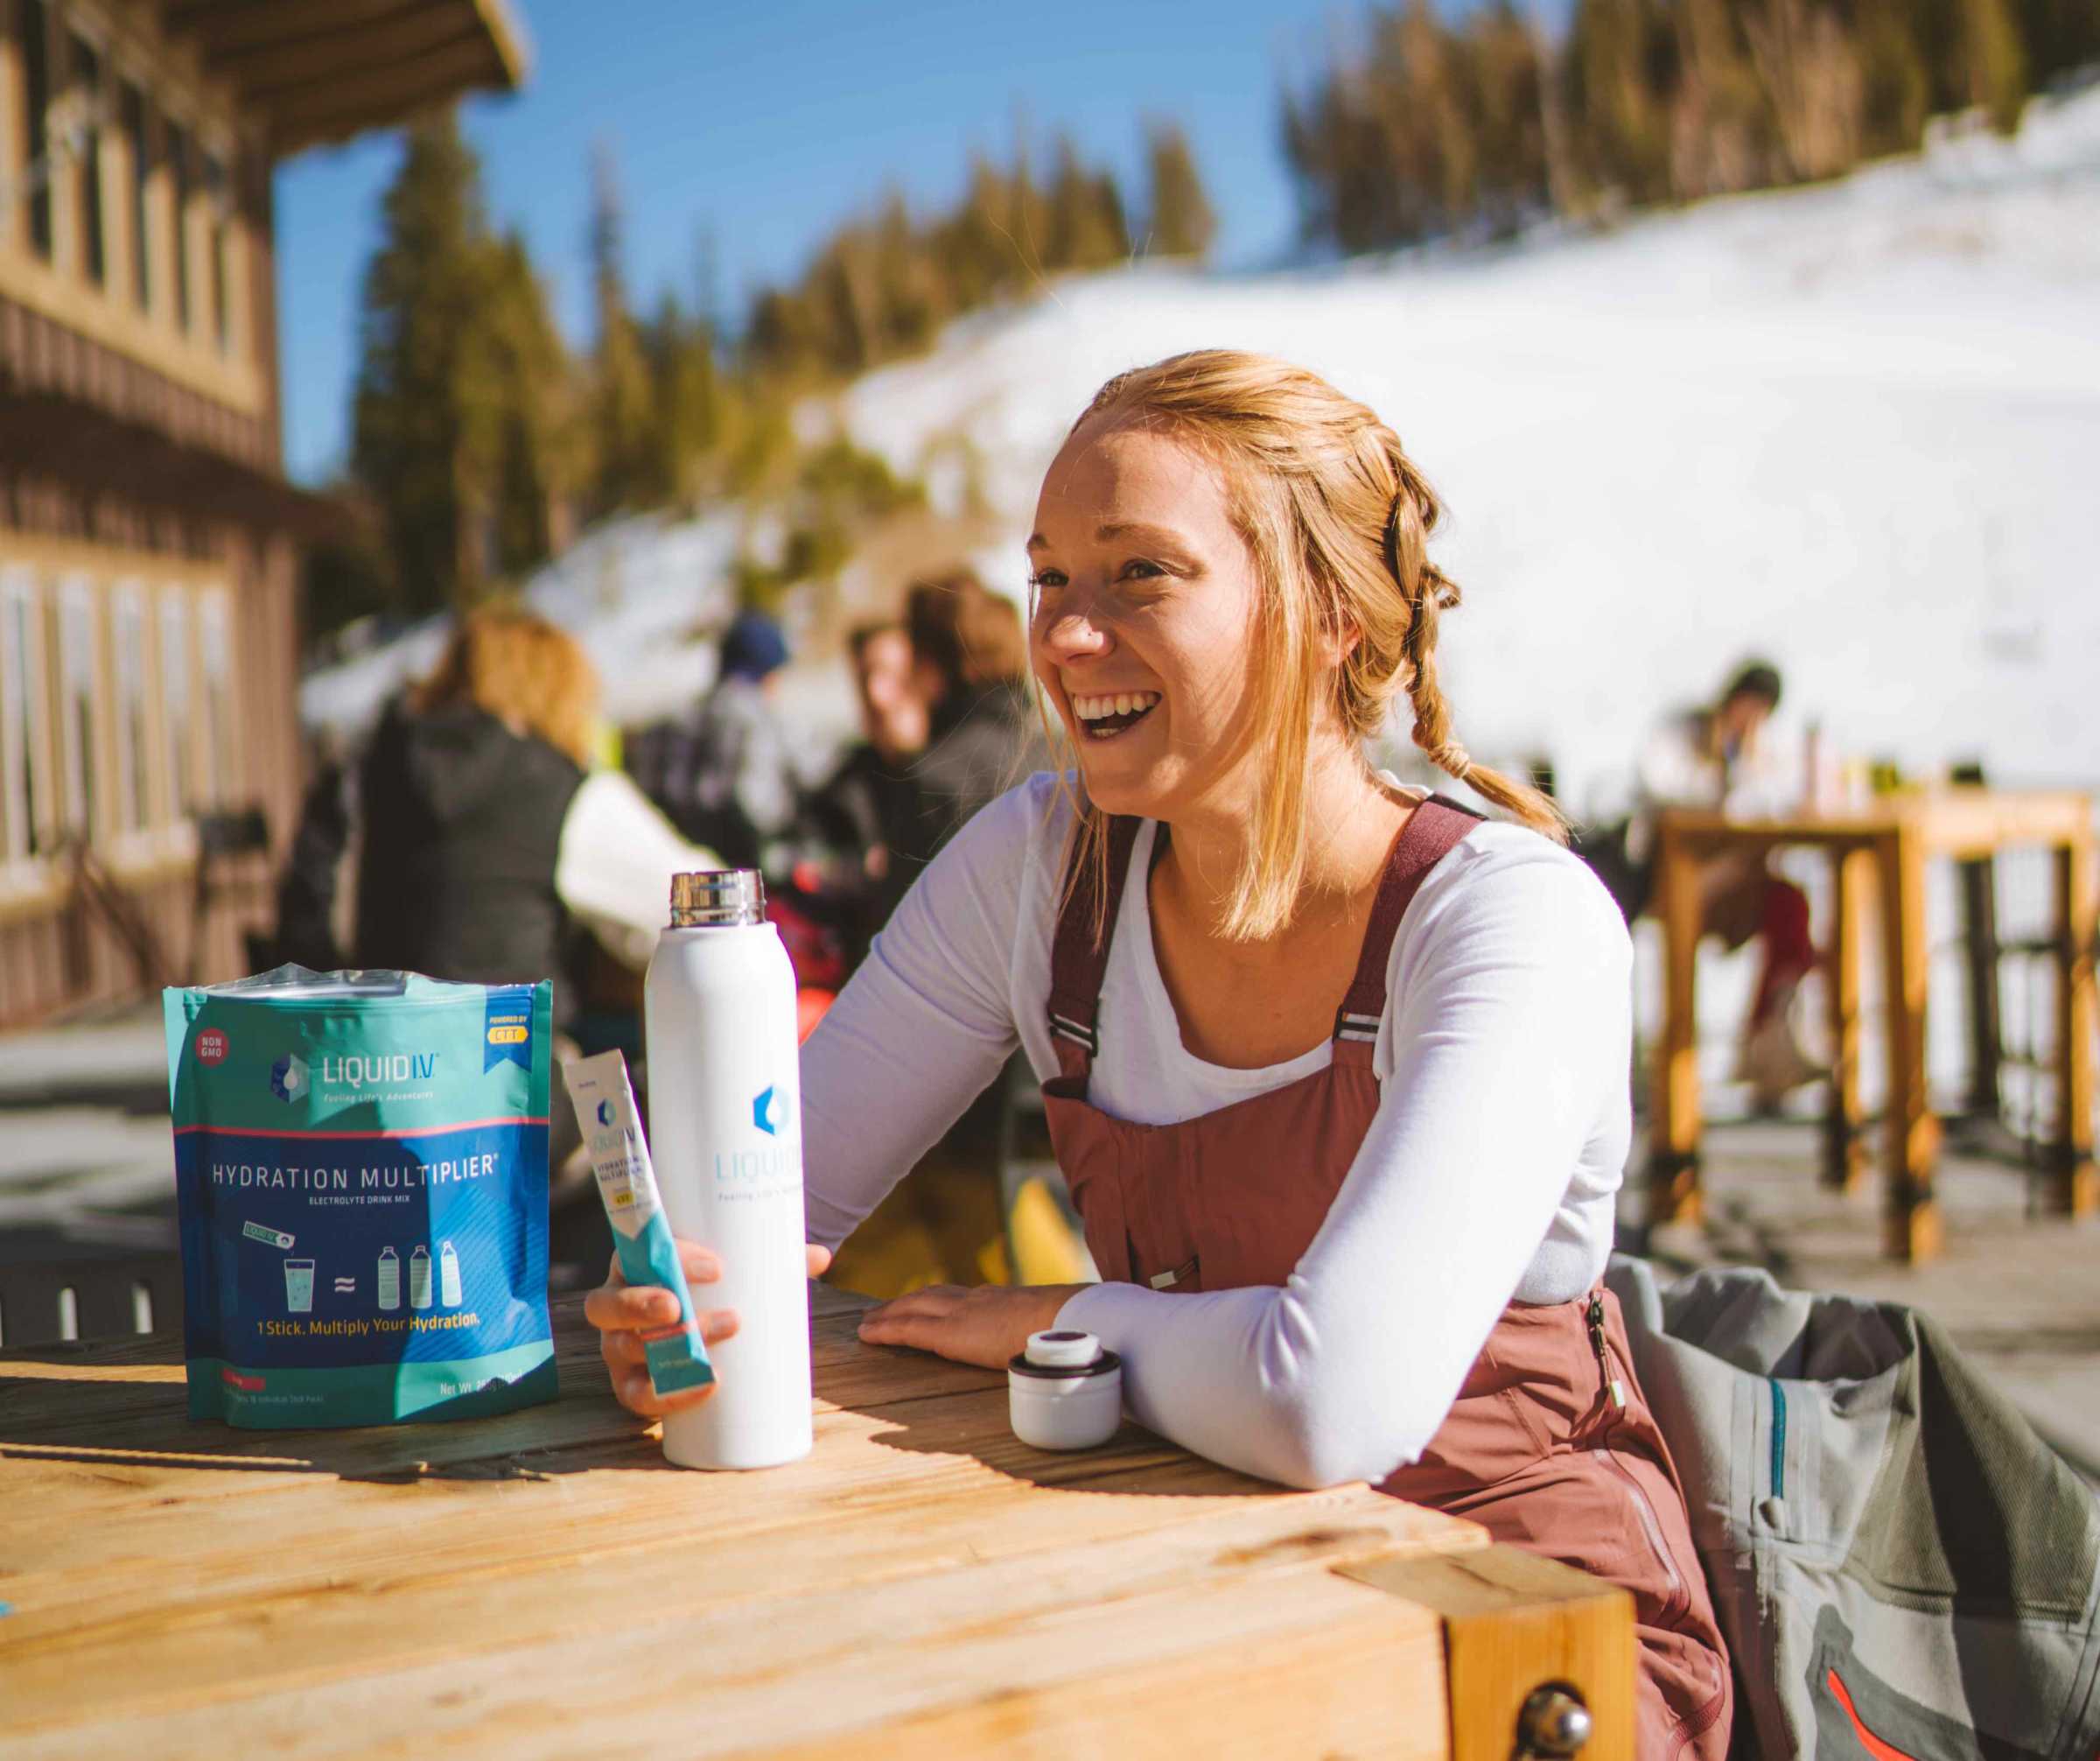 Happy young woman takes a break from skiing to hydrate with Liquid I.V. 